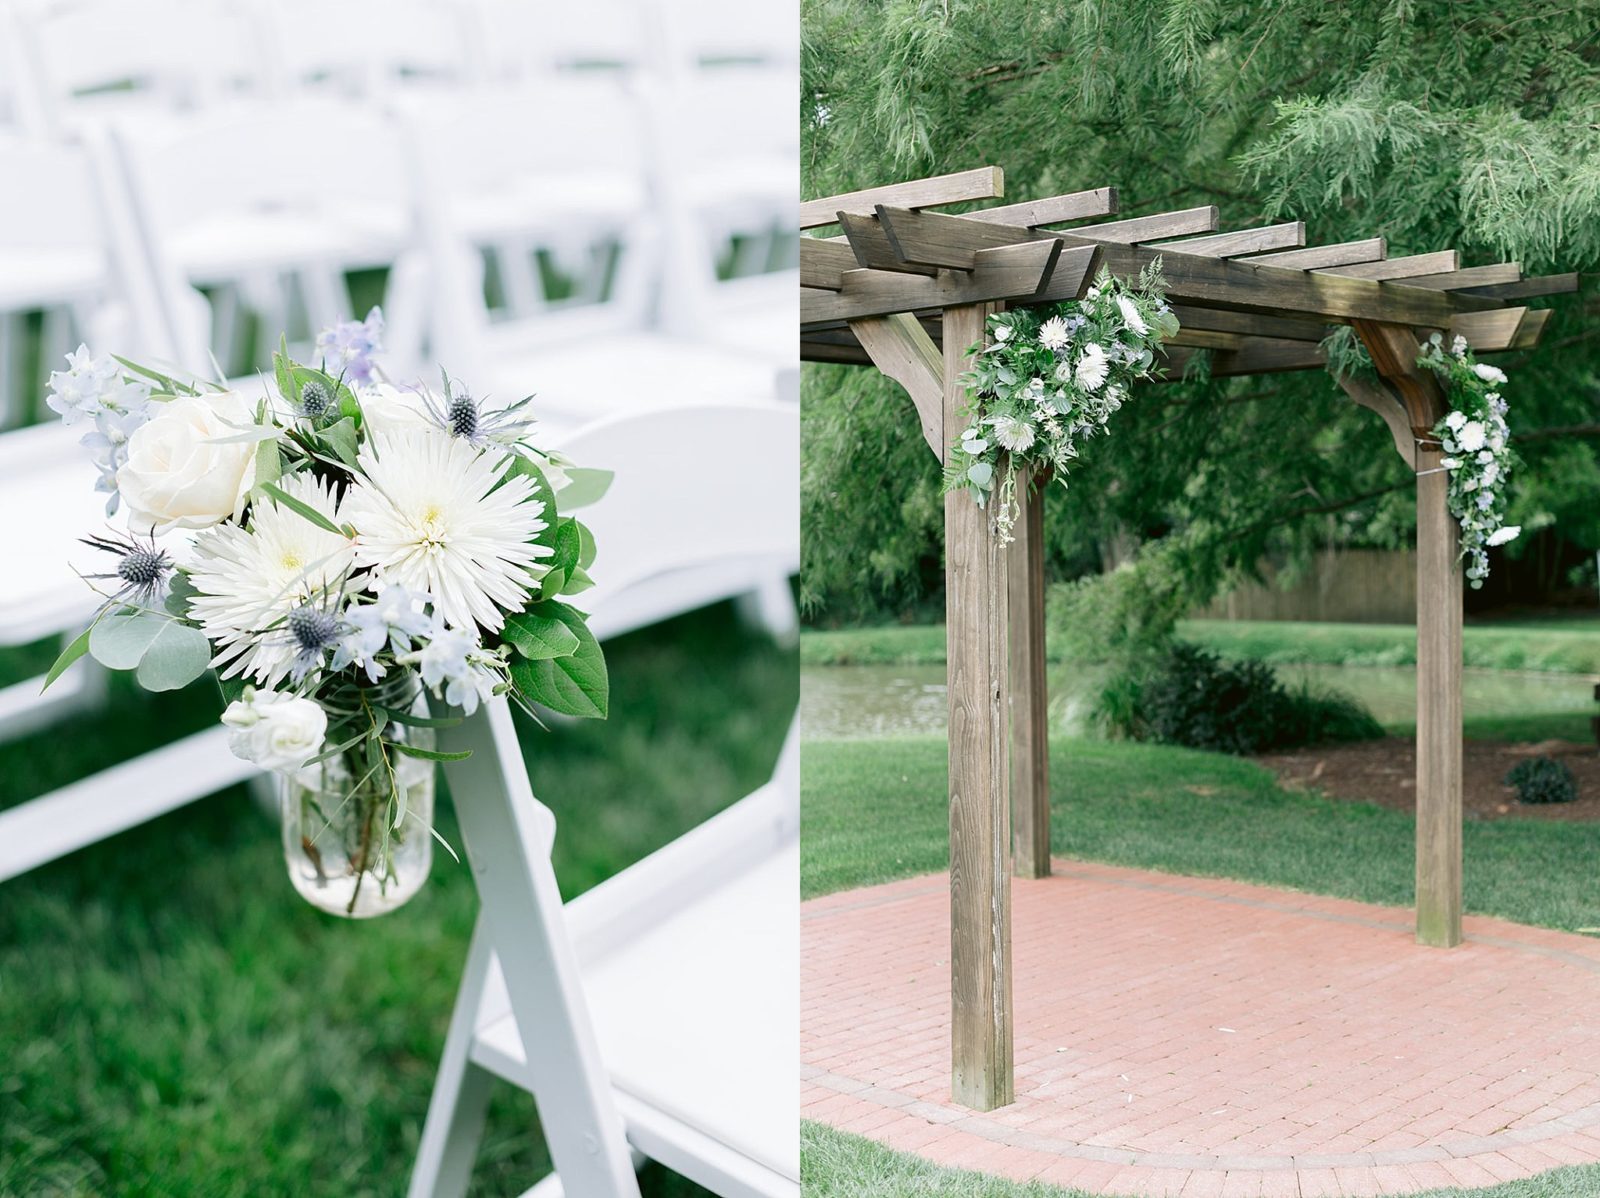 image shows rows of white chairs and an arch decorated with greenery, all set up for an outdoor wedding by the pond at historic acres of hershey